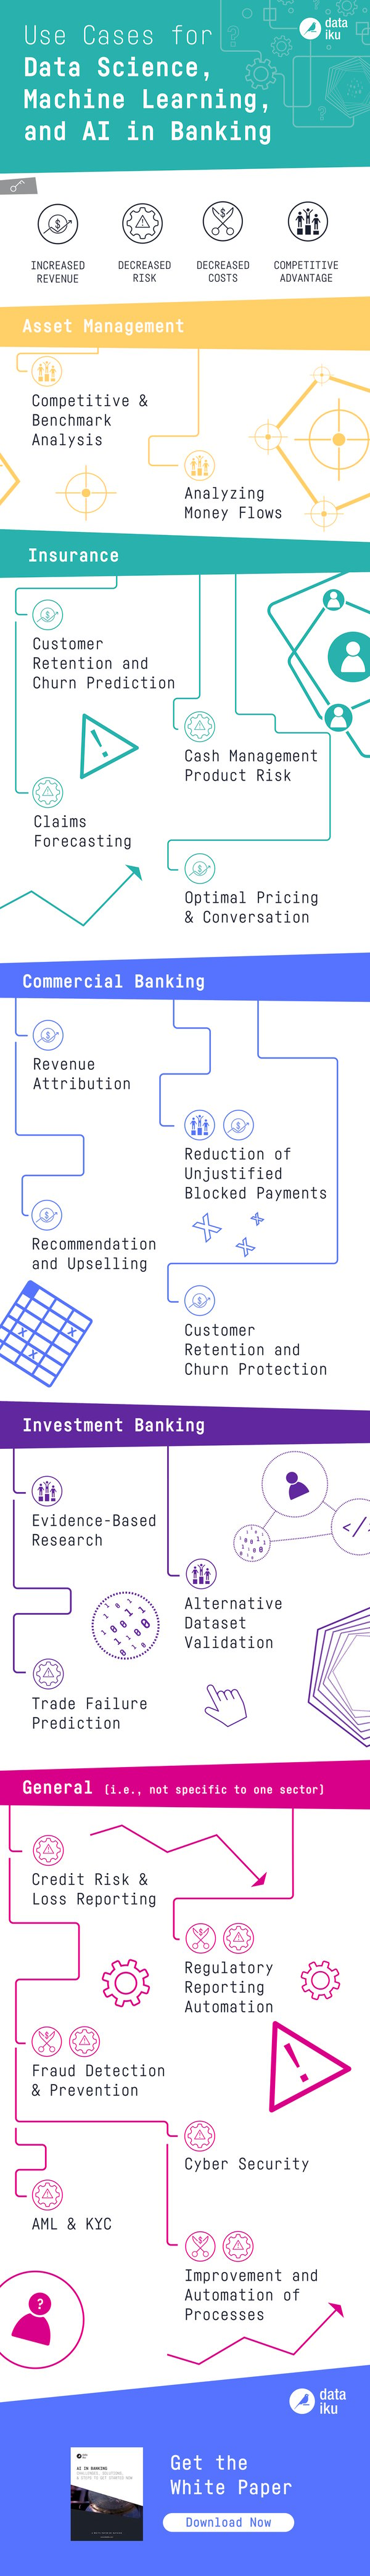 INFOGRAPHIC-top-banking-use-cases